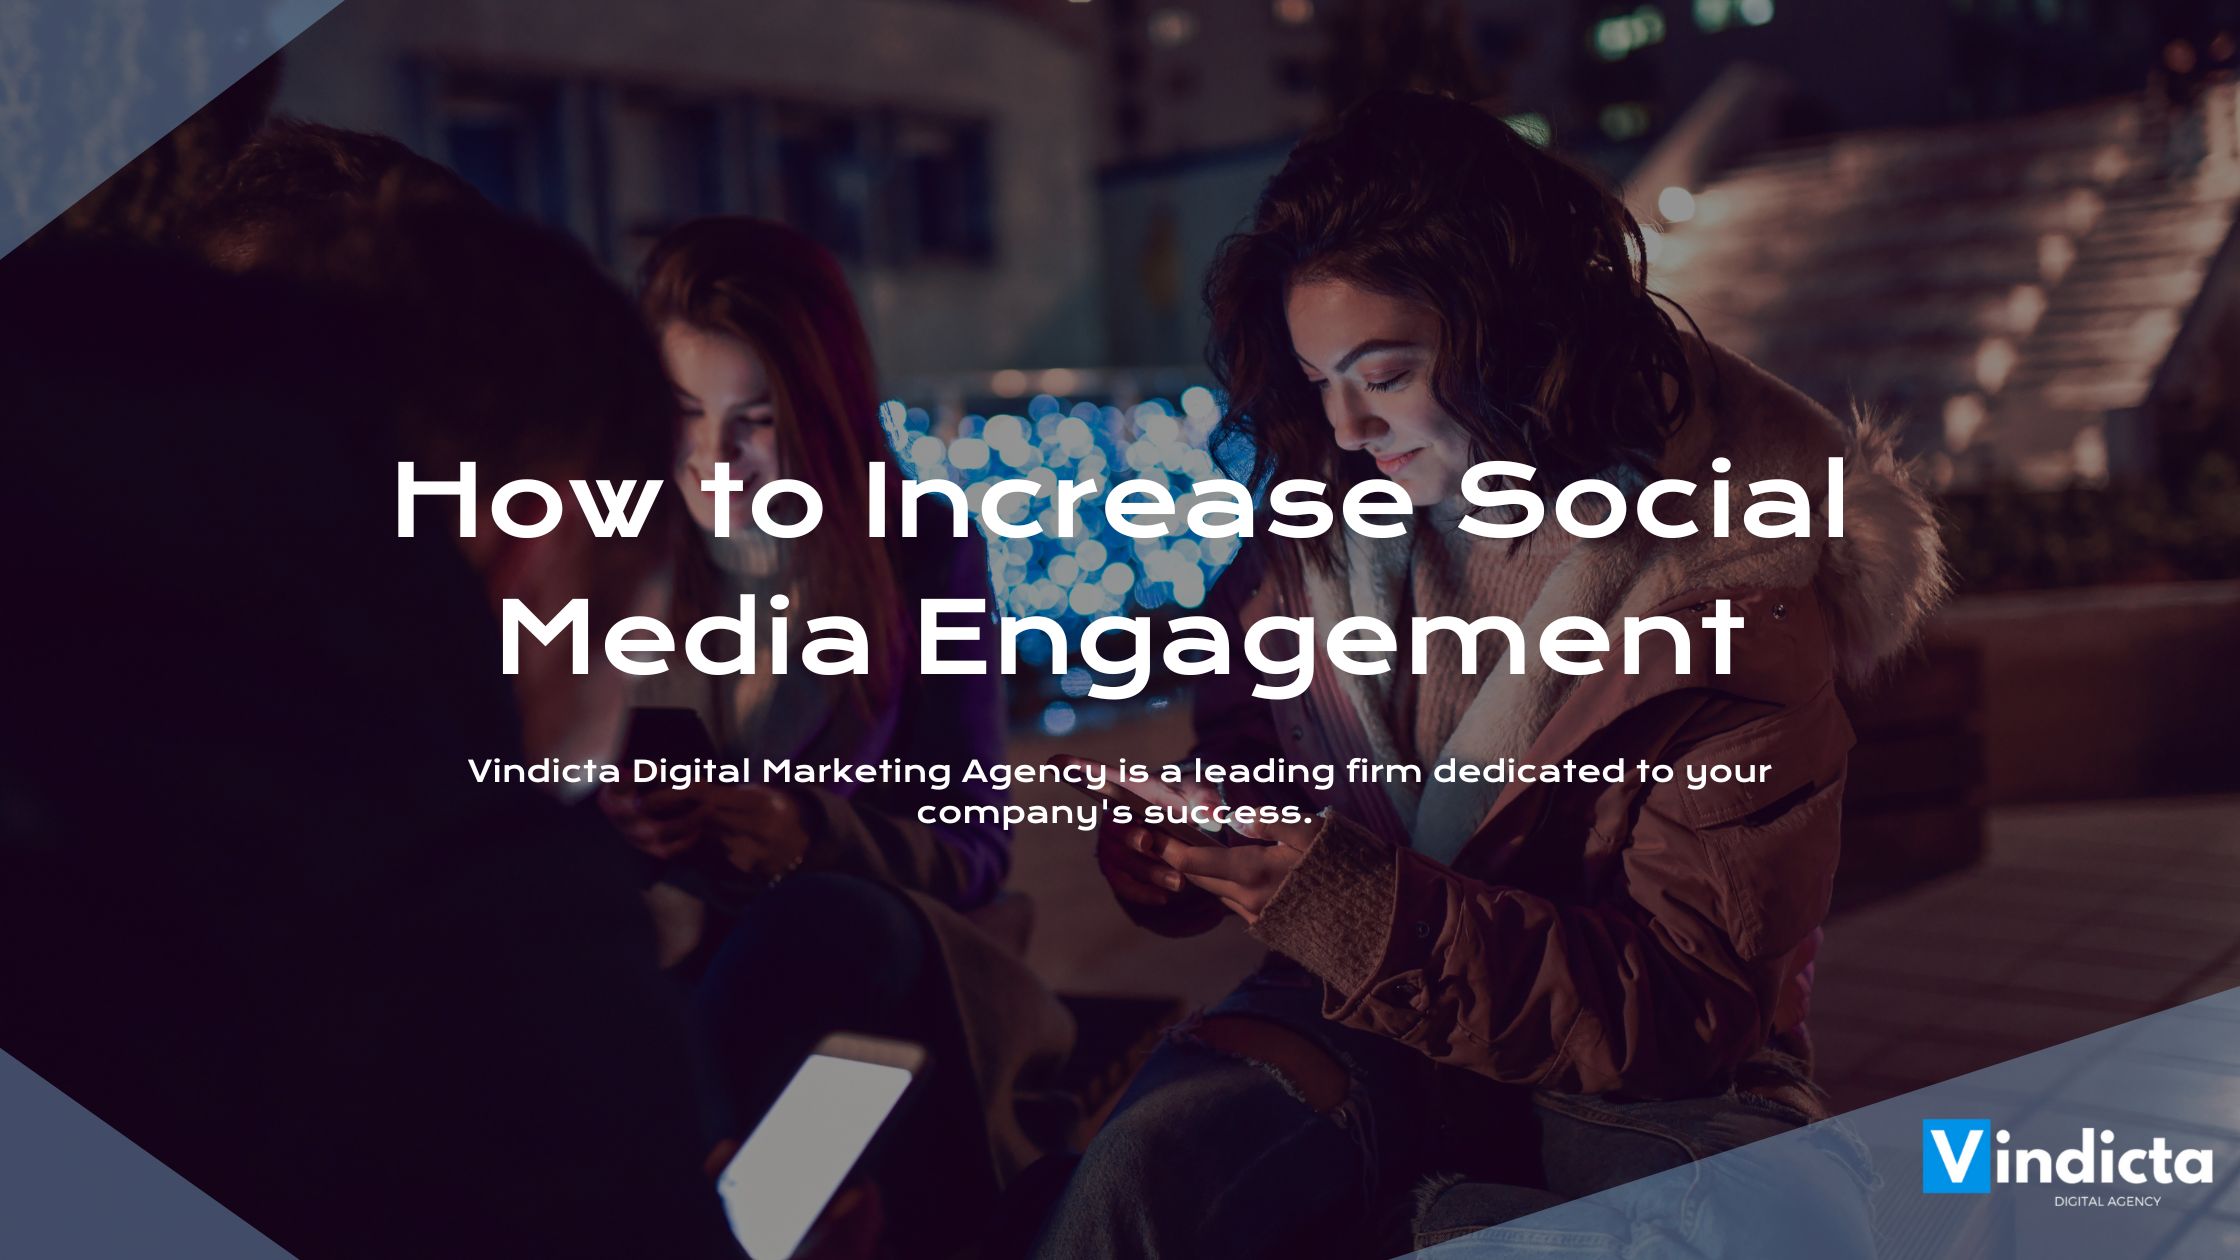 How to Increase Social Media Engagement